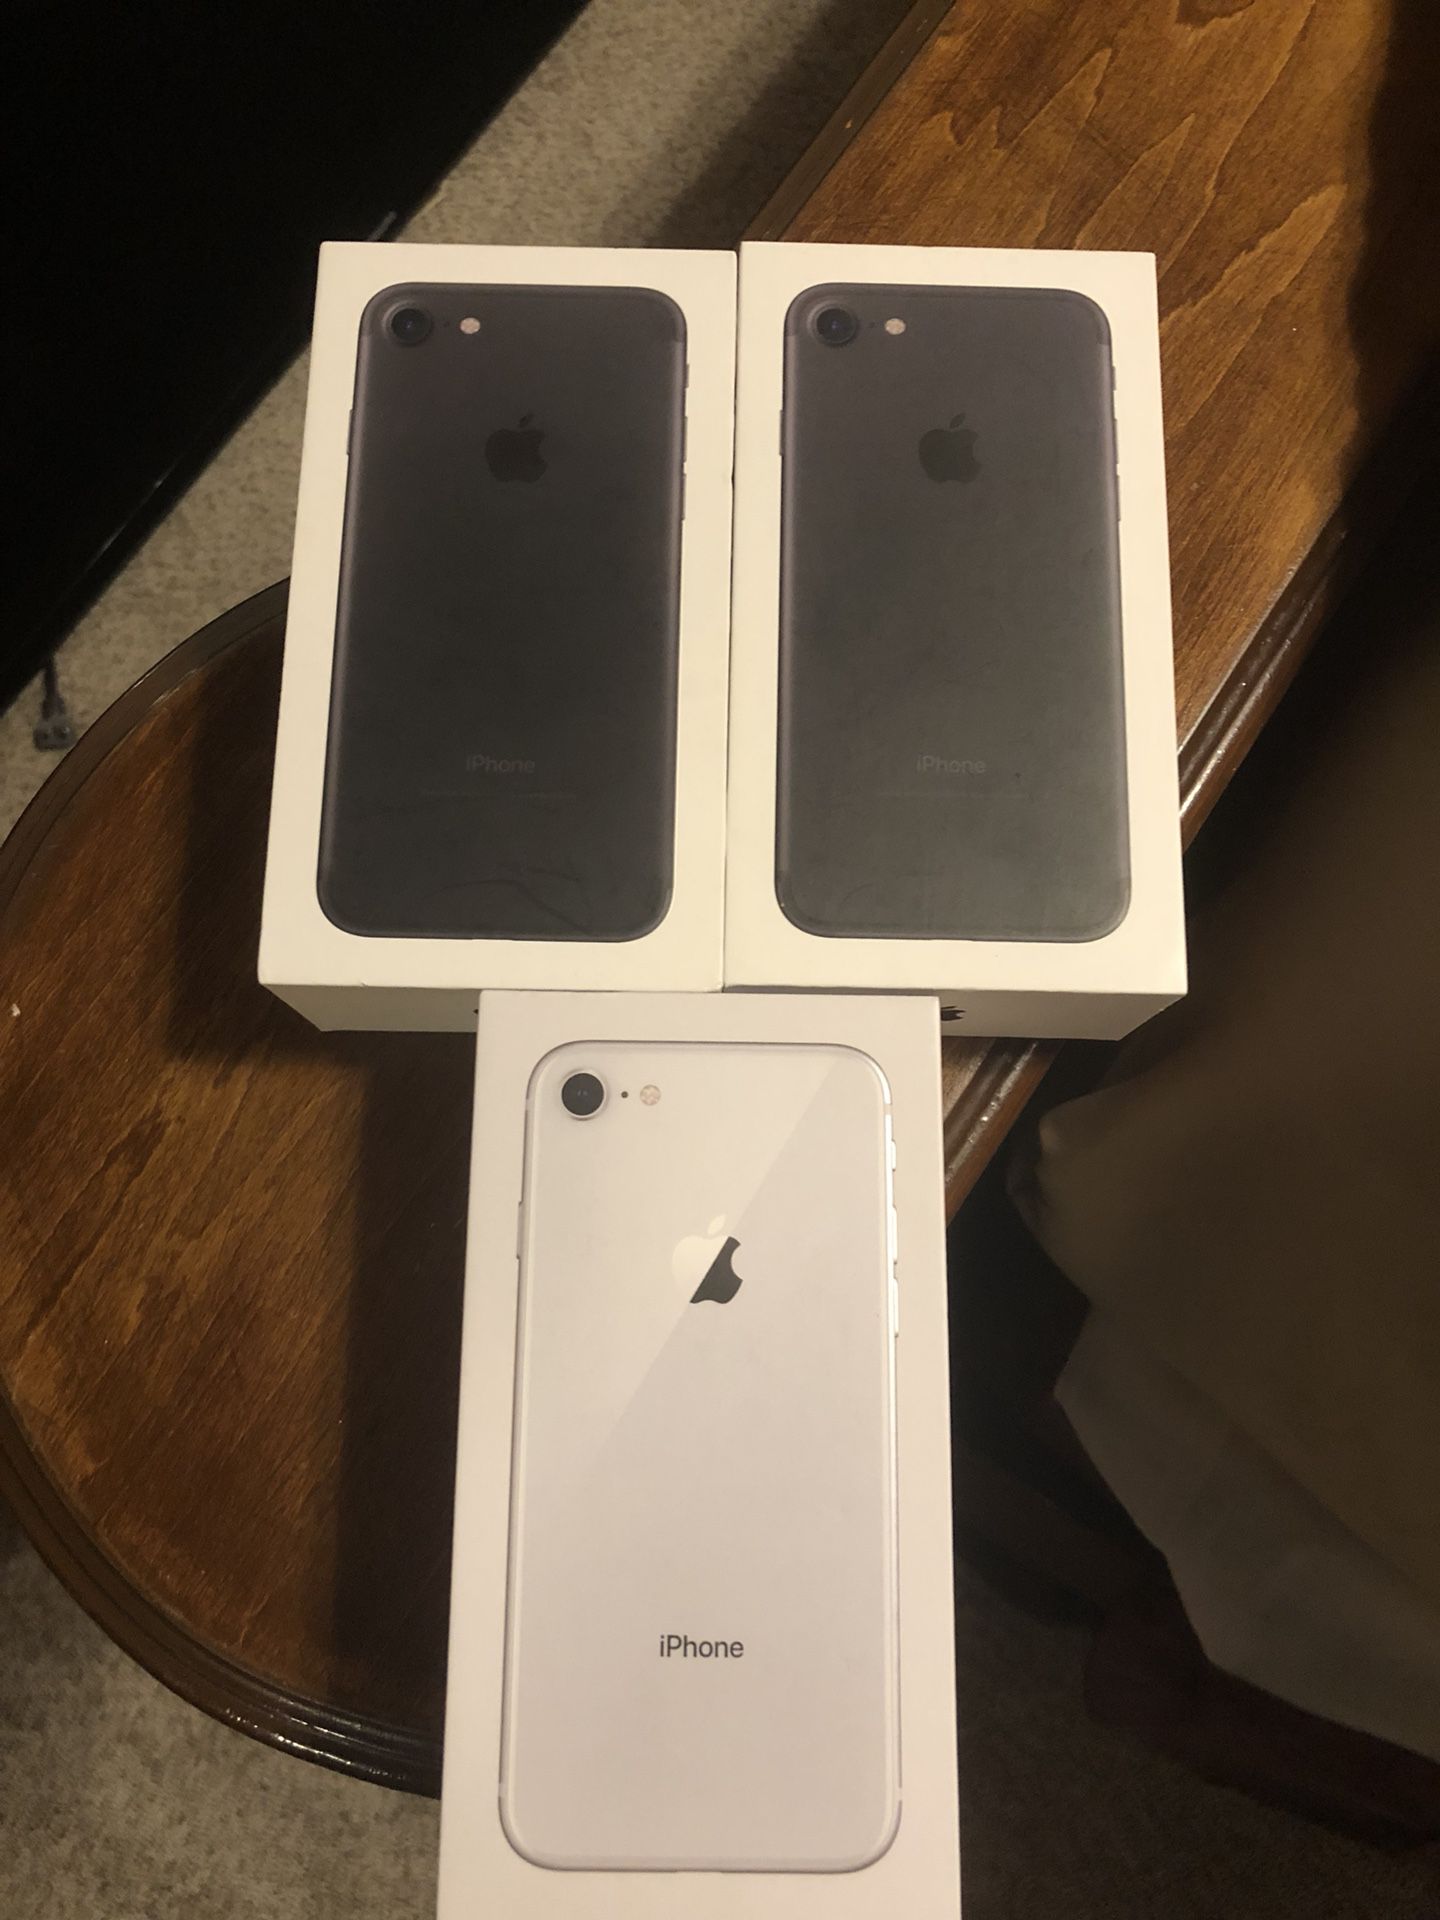 IPhone Boxes